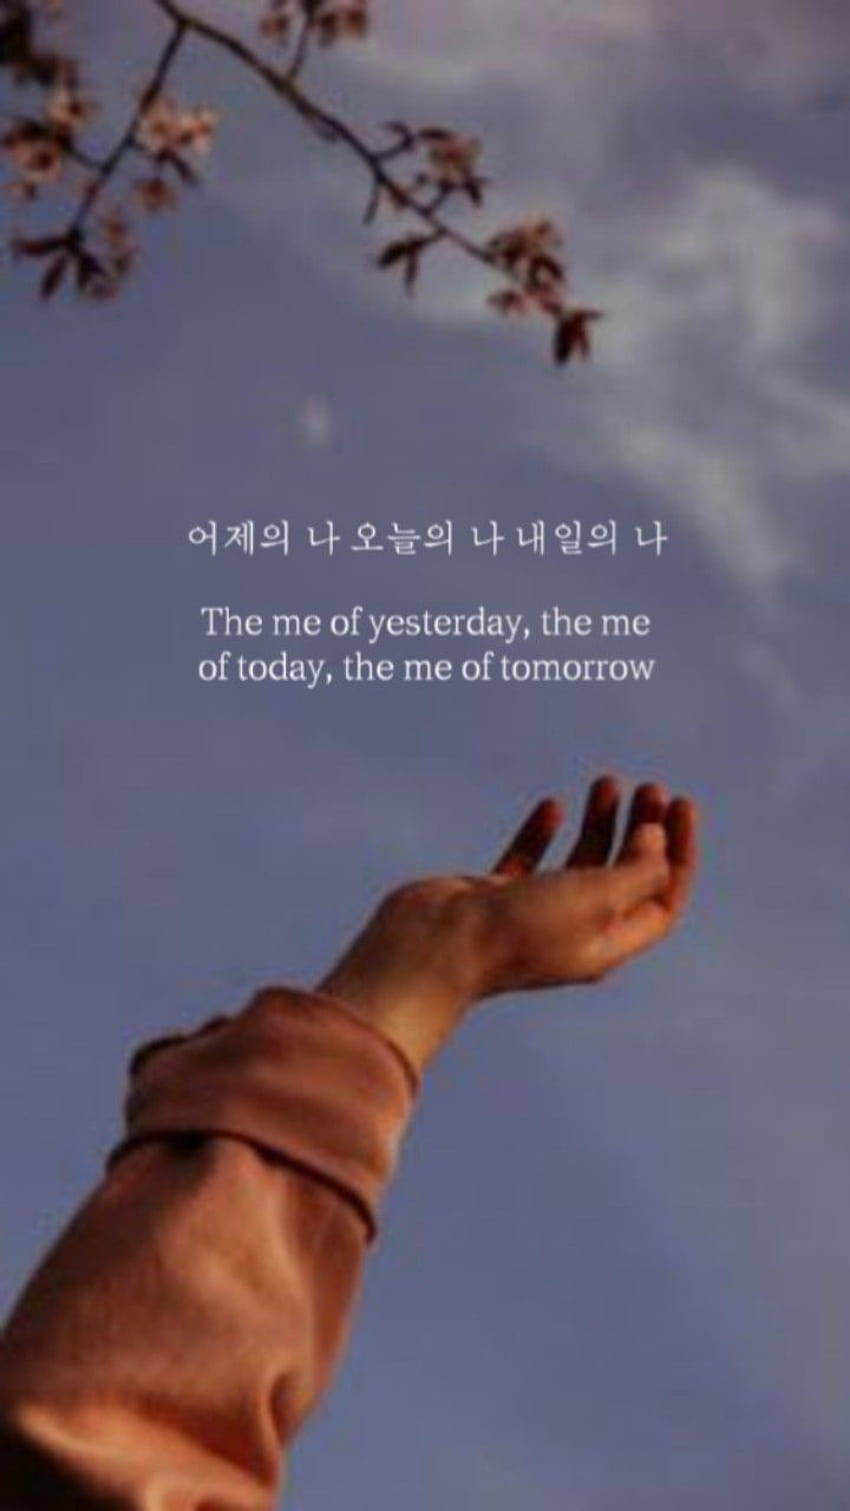 BTS inspirational lyric shared by Persona, insprational aesthetic quotes HD phone wallpaper